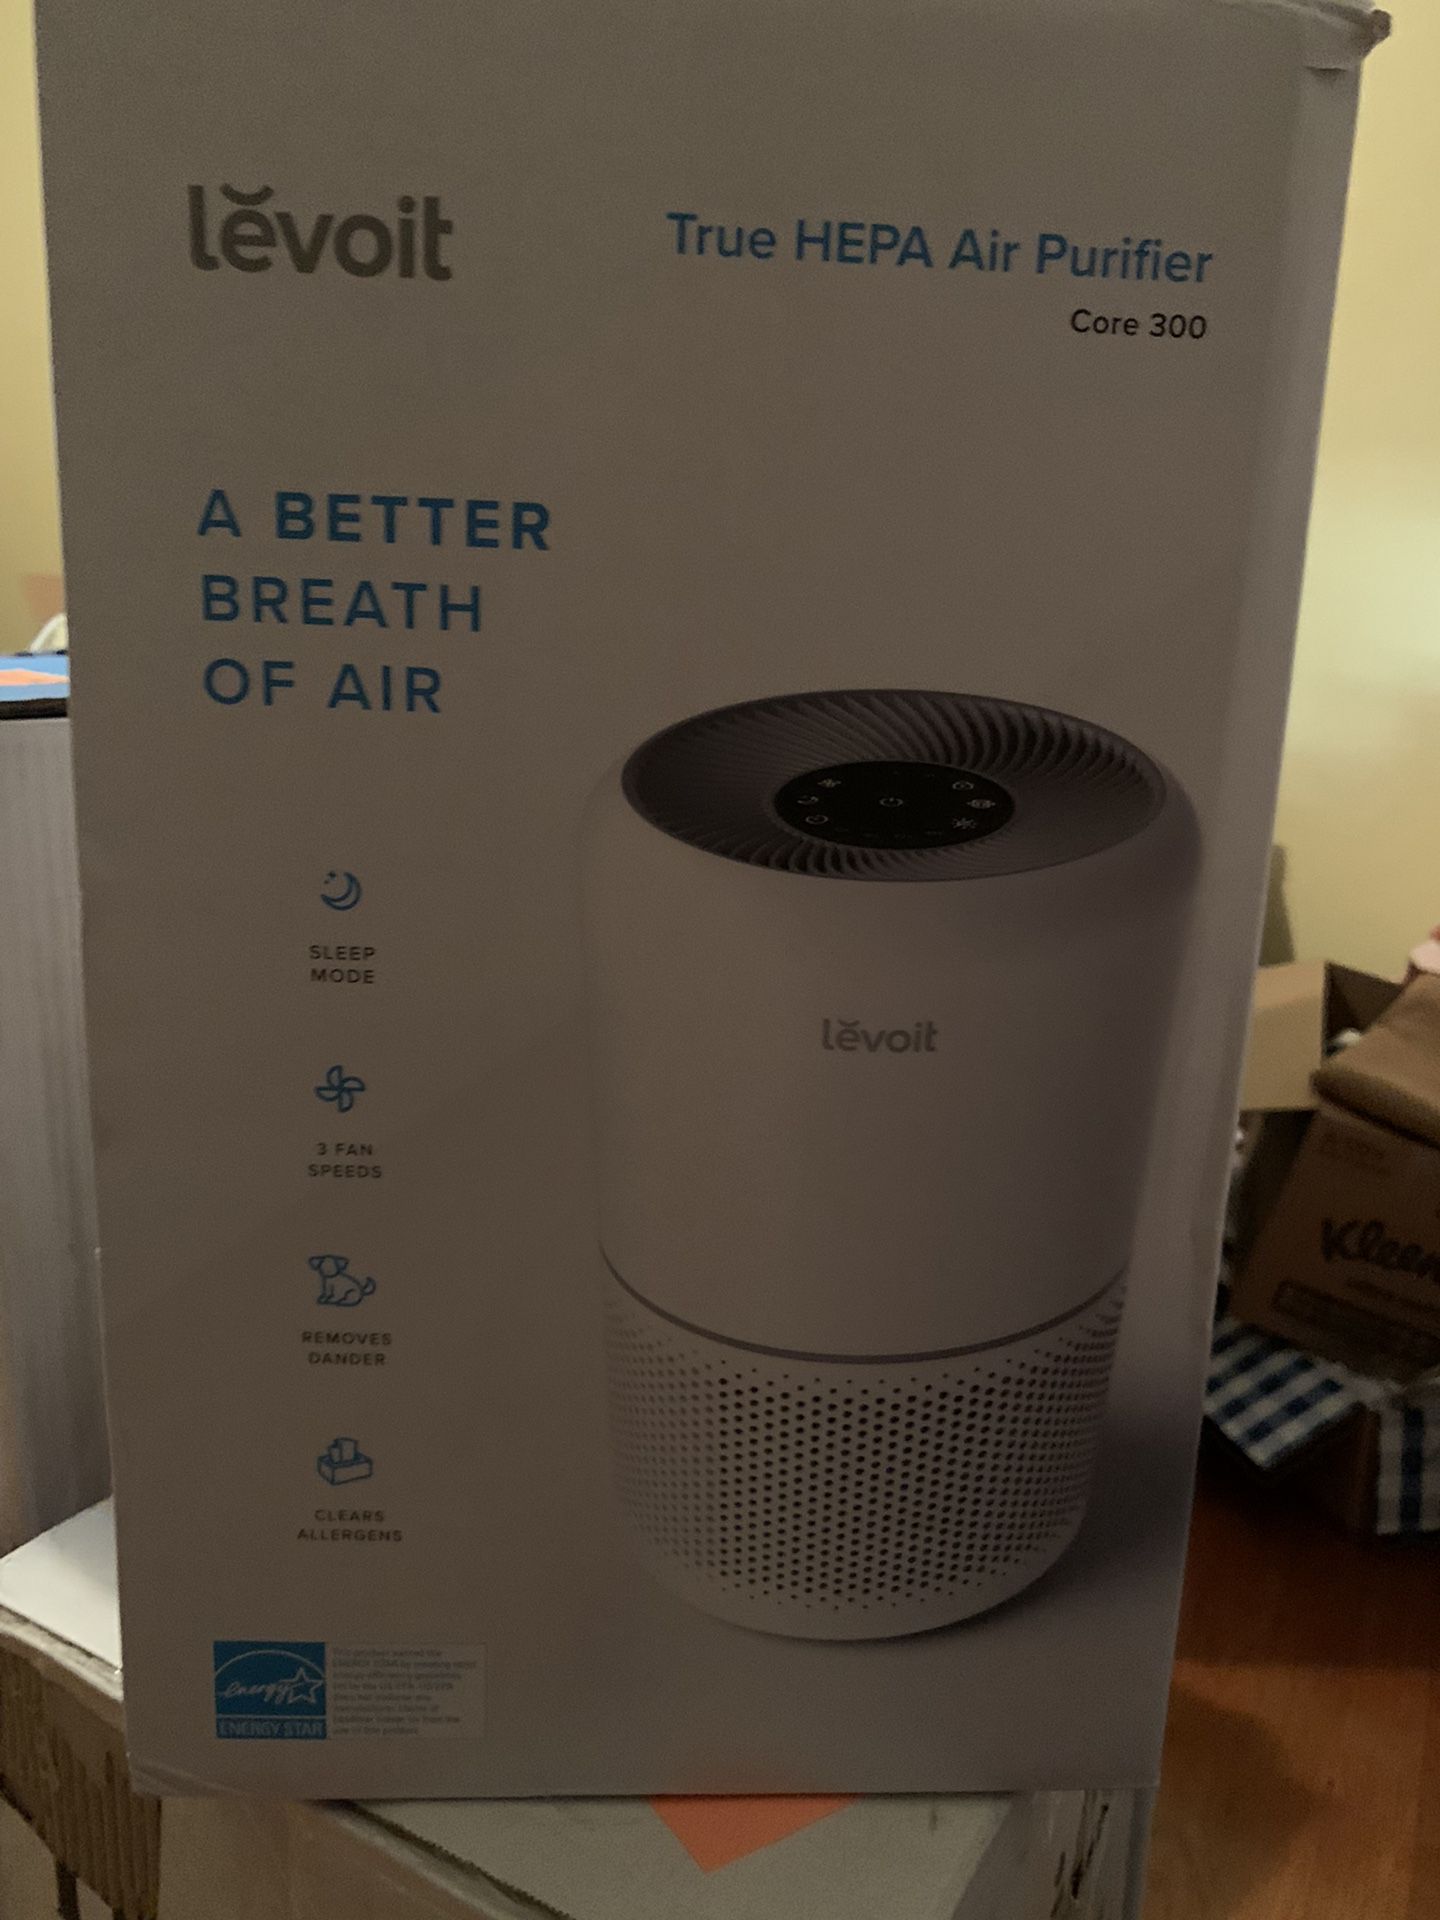 Brand New LEVOIT Air Purifier for Home Allergies Pets Hair in Bedroom, H13 True HEPA Filter, 24db Filtration System Cleaner Odor Eliminators, Ozone Fr